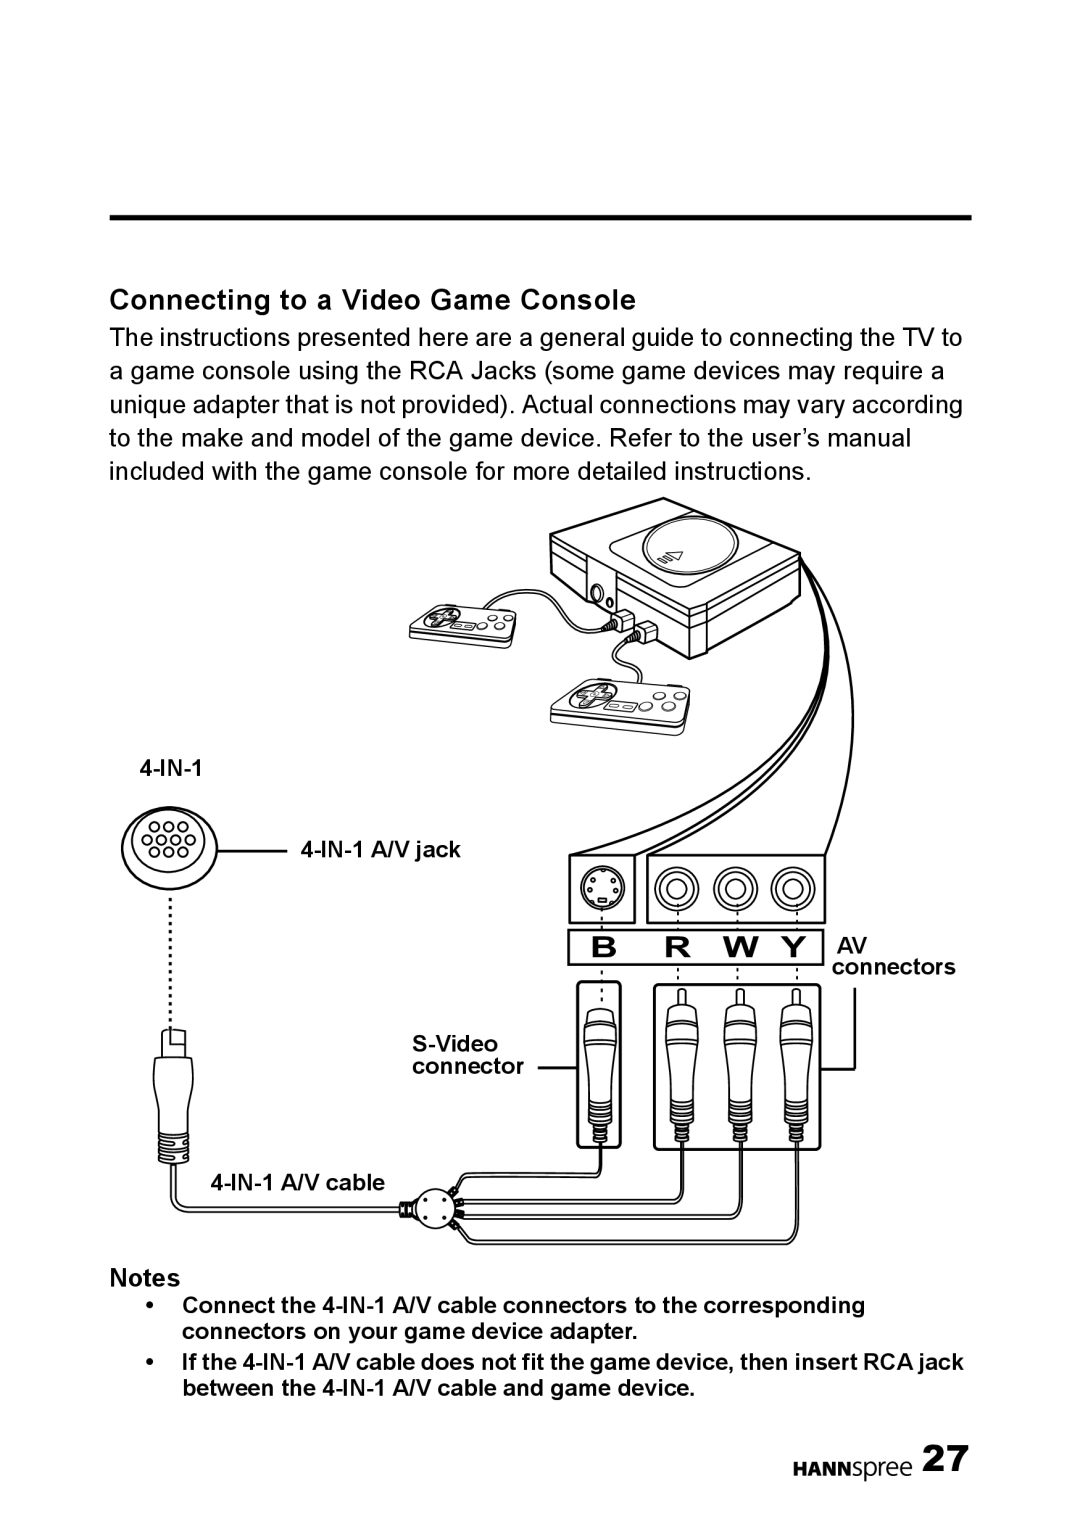 HANNspree HANNSz.crab user manual Connecting to a Video Game Console, B R W Y 